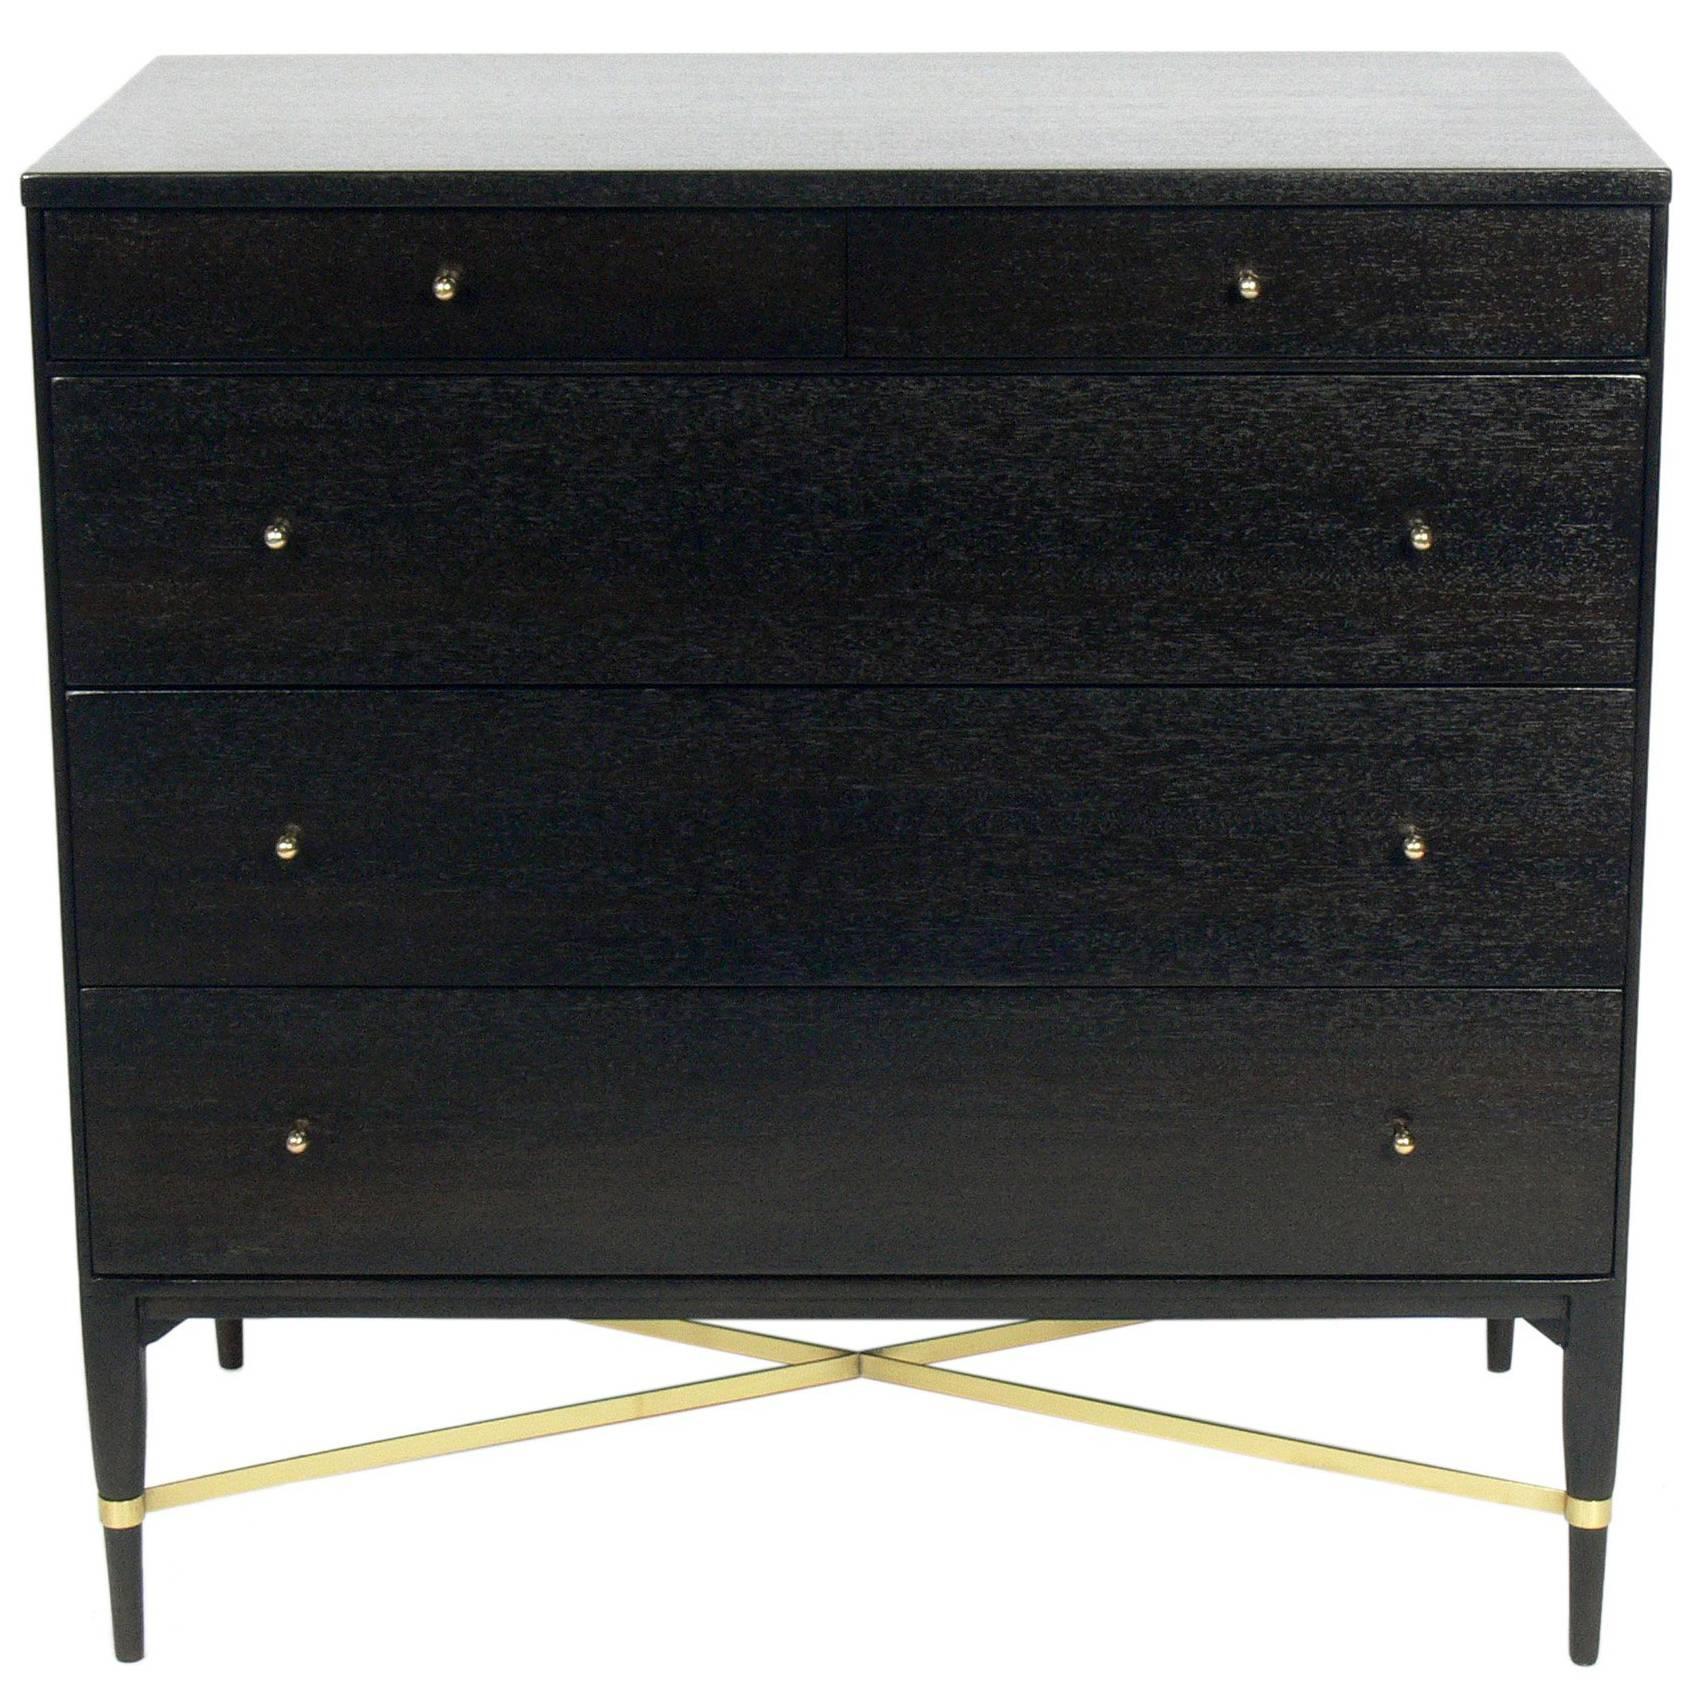 Paul McCobb Chest of Drawers